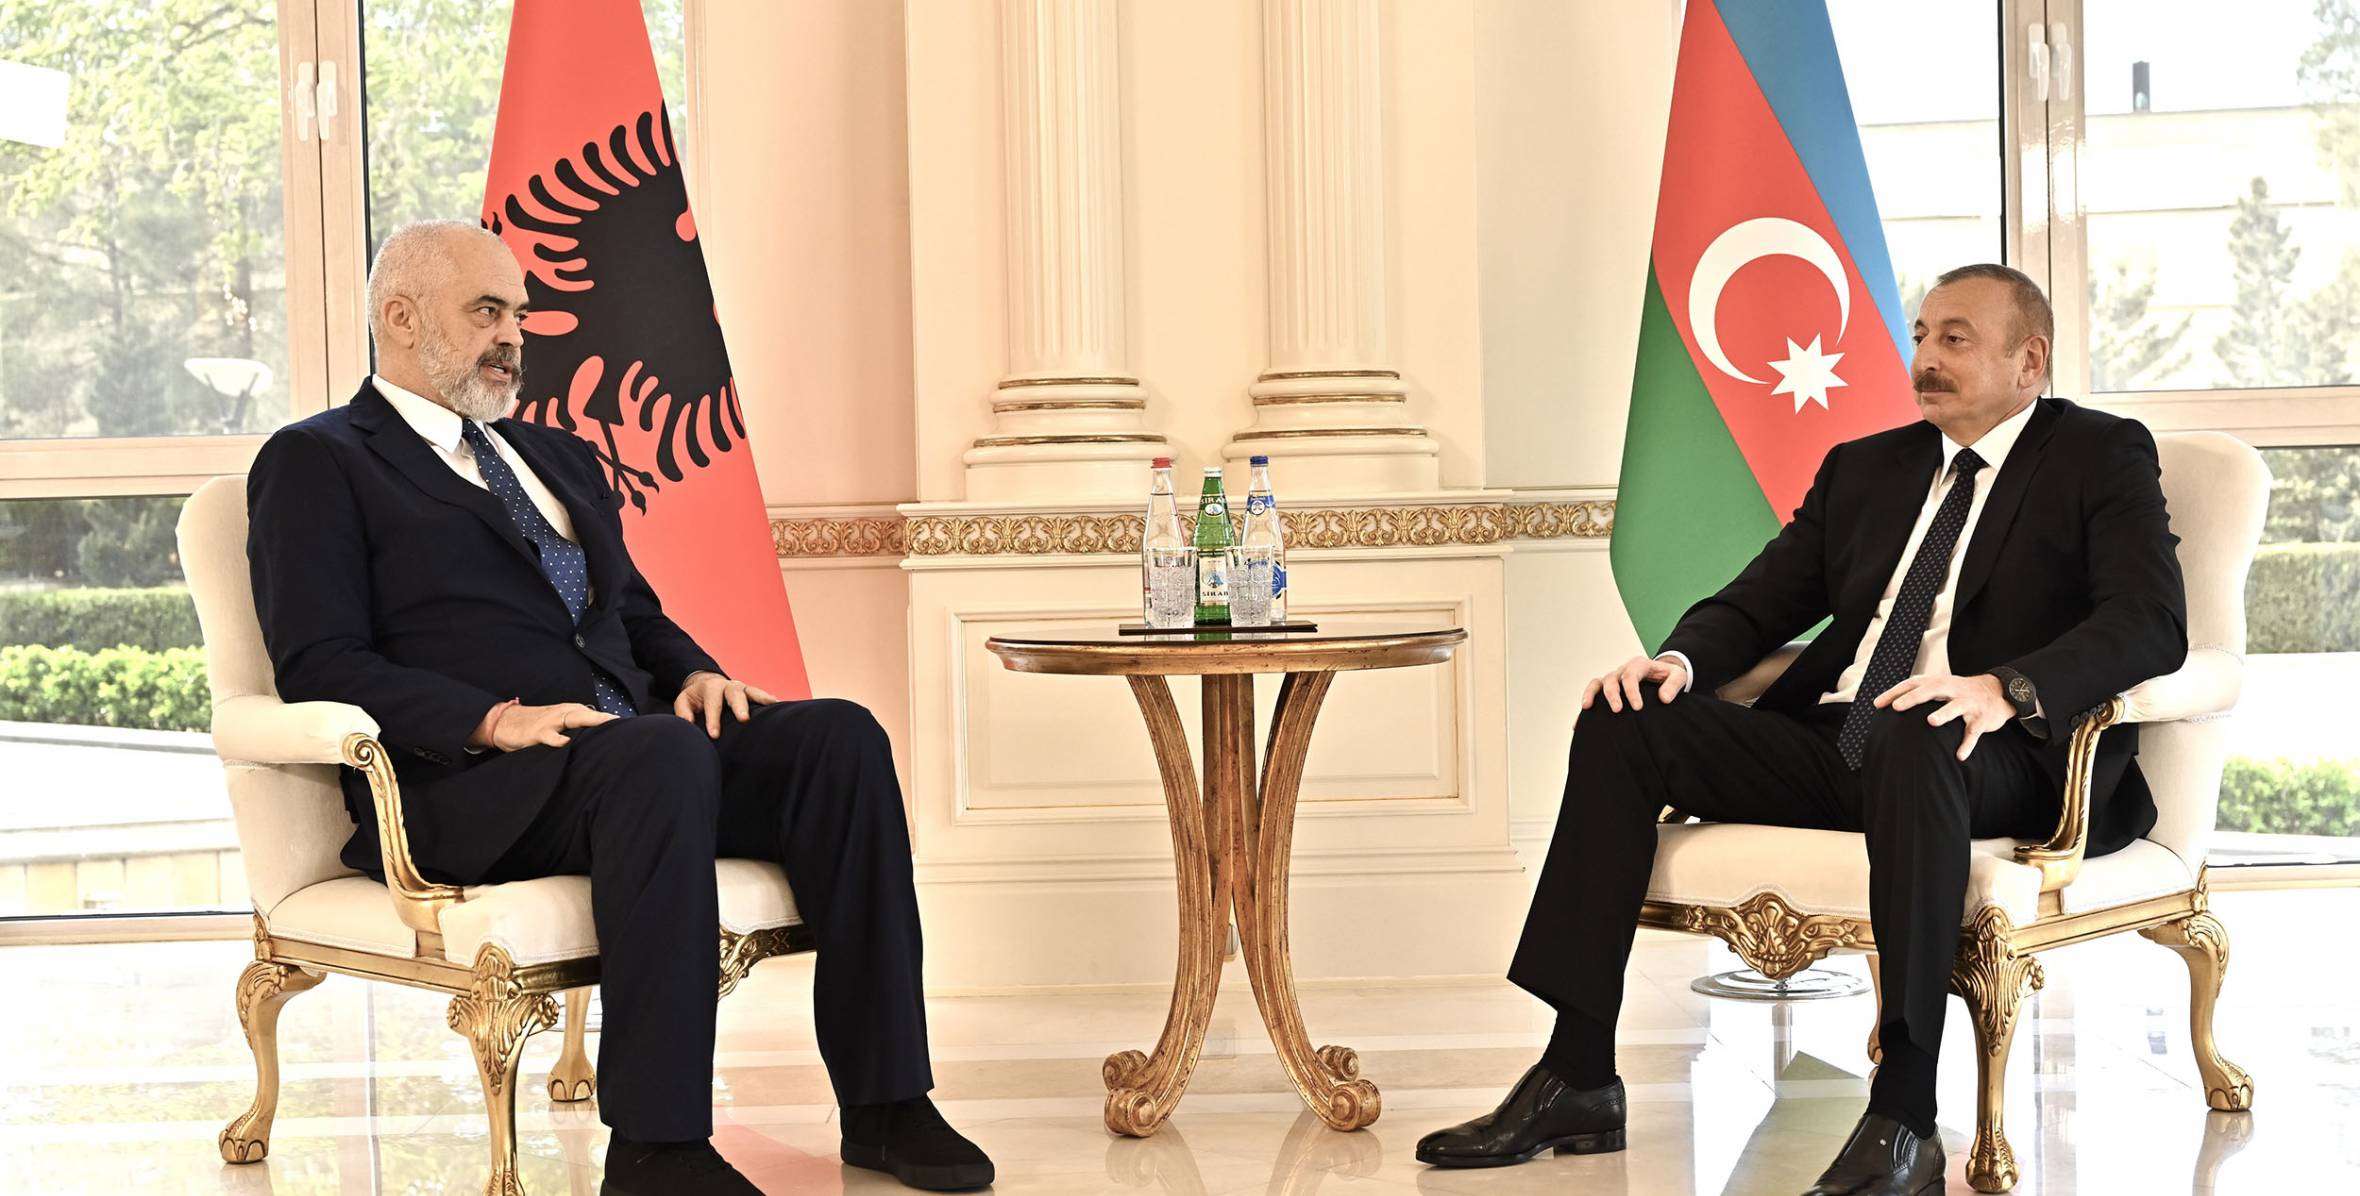 Ilham Aliyev, Prime Minister of Albania held one-on-one meeting